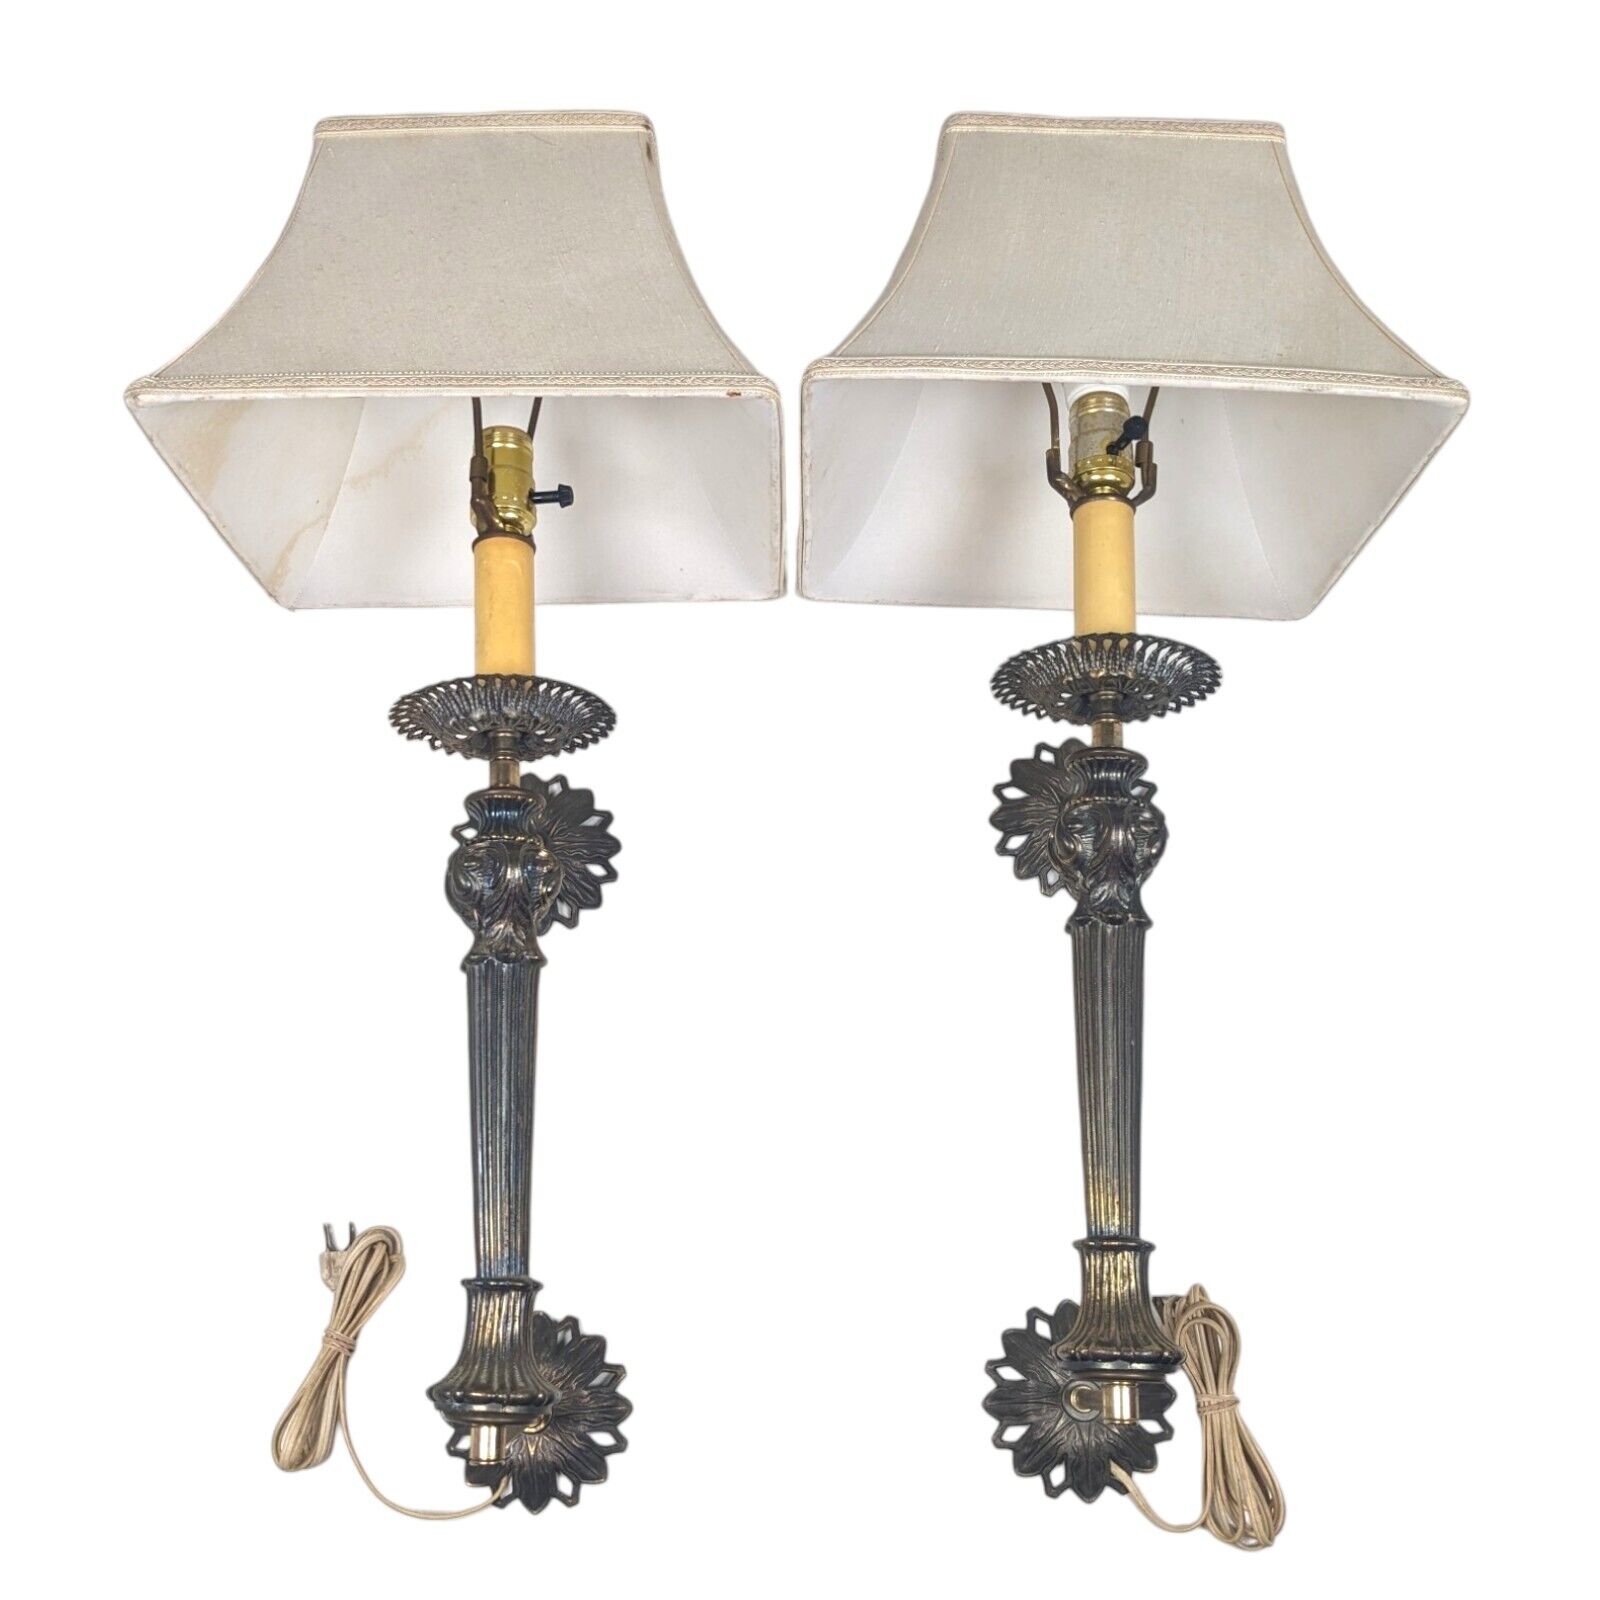 Pair Of Vintage Wall Mounted  Bedside Lamp Sconce - Candlestick Hanging - RARE